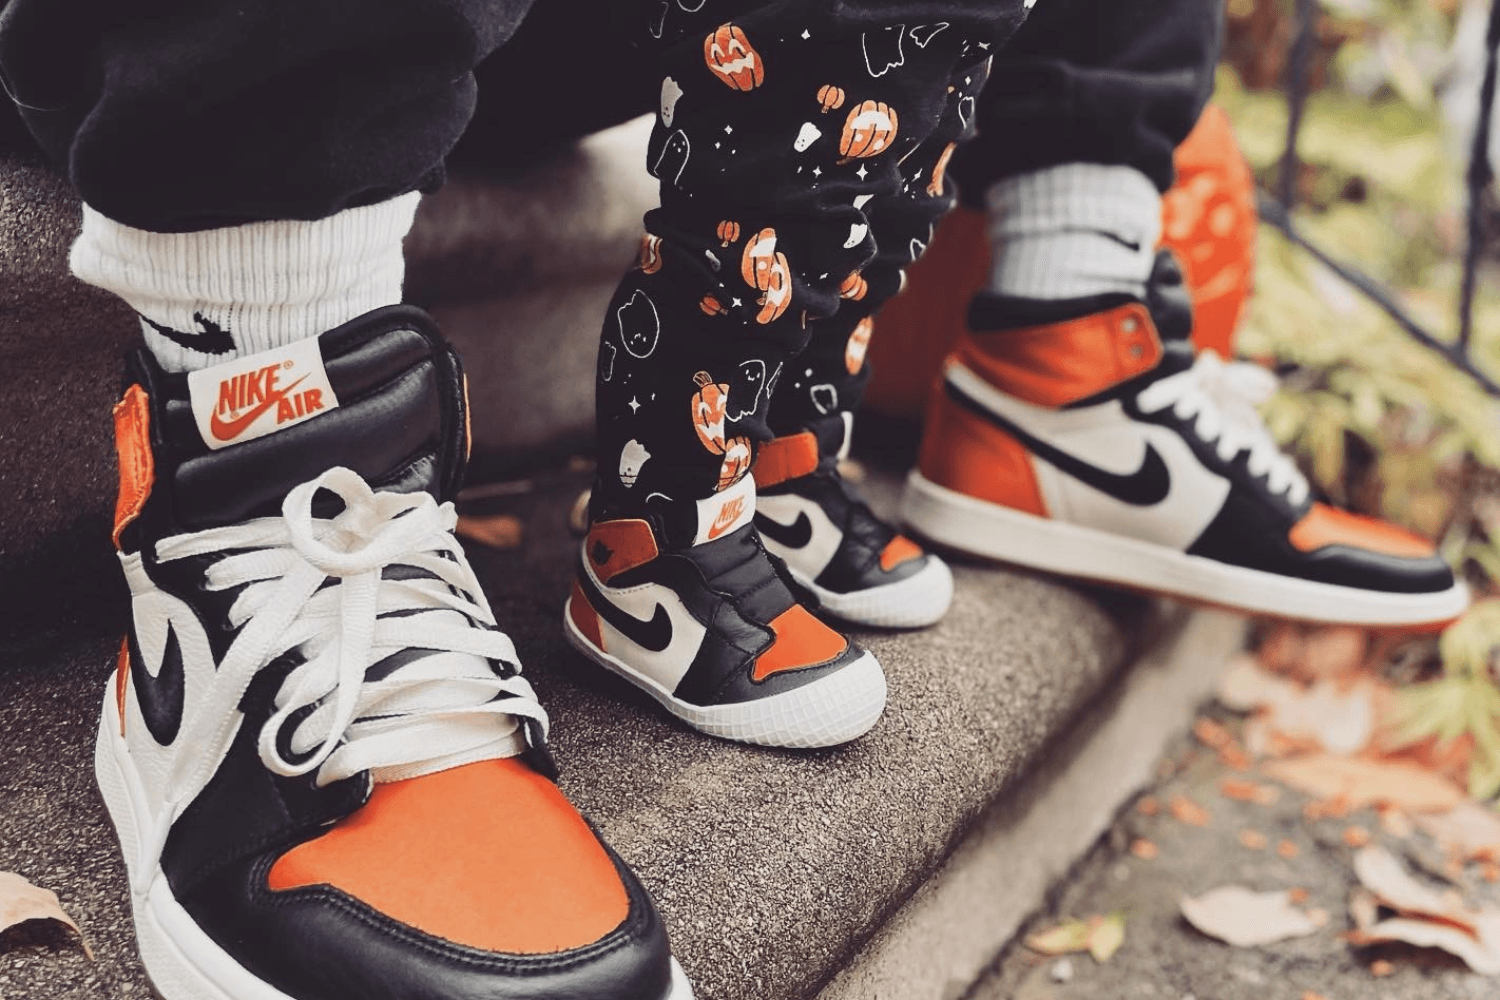 Hyped sneaker releases for kids